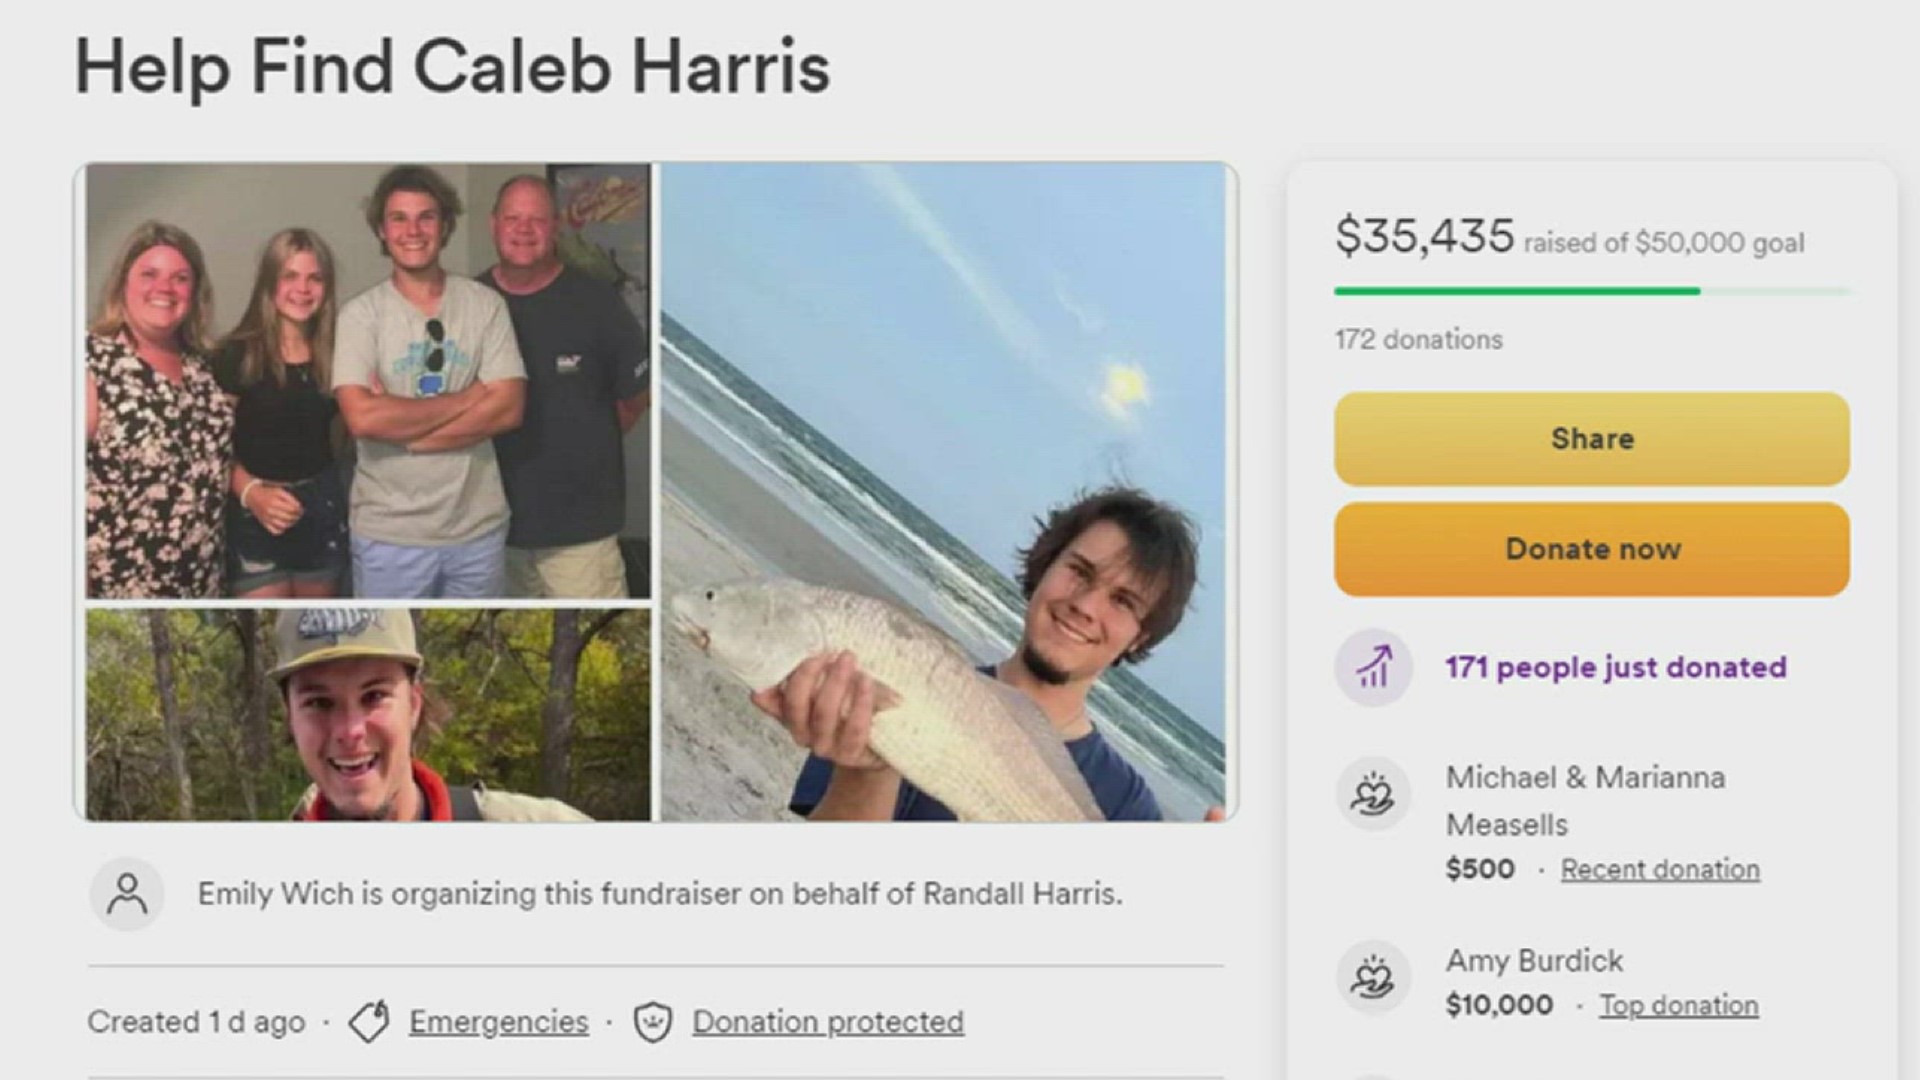 The funds will be used for resources needed to aid in bringing Caleb home.